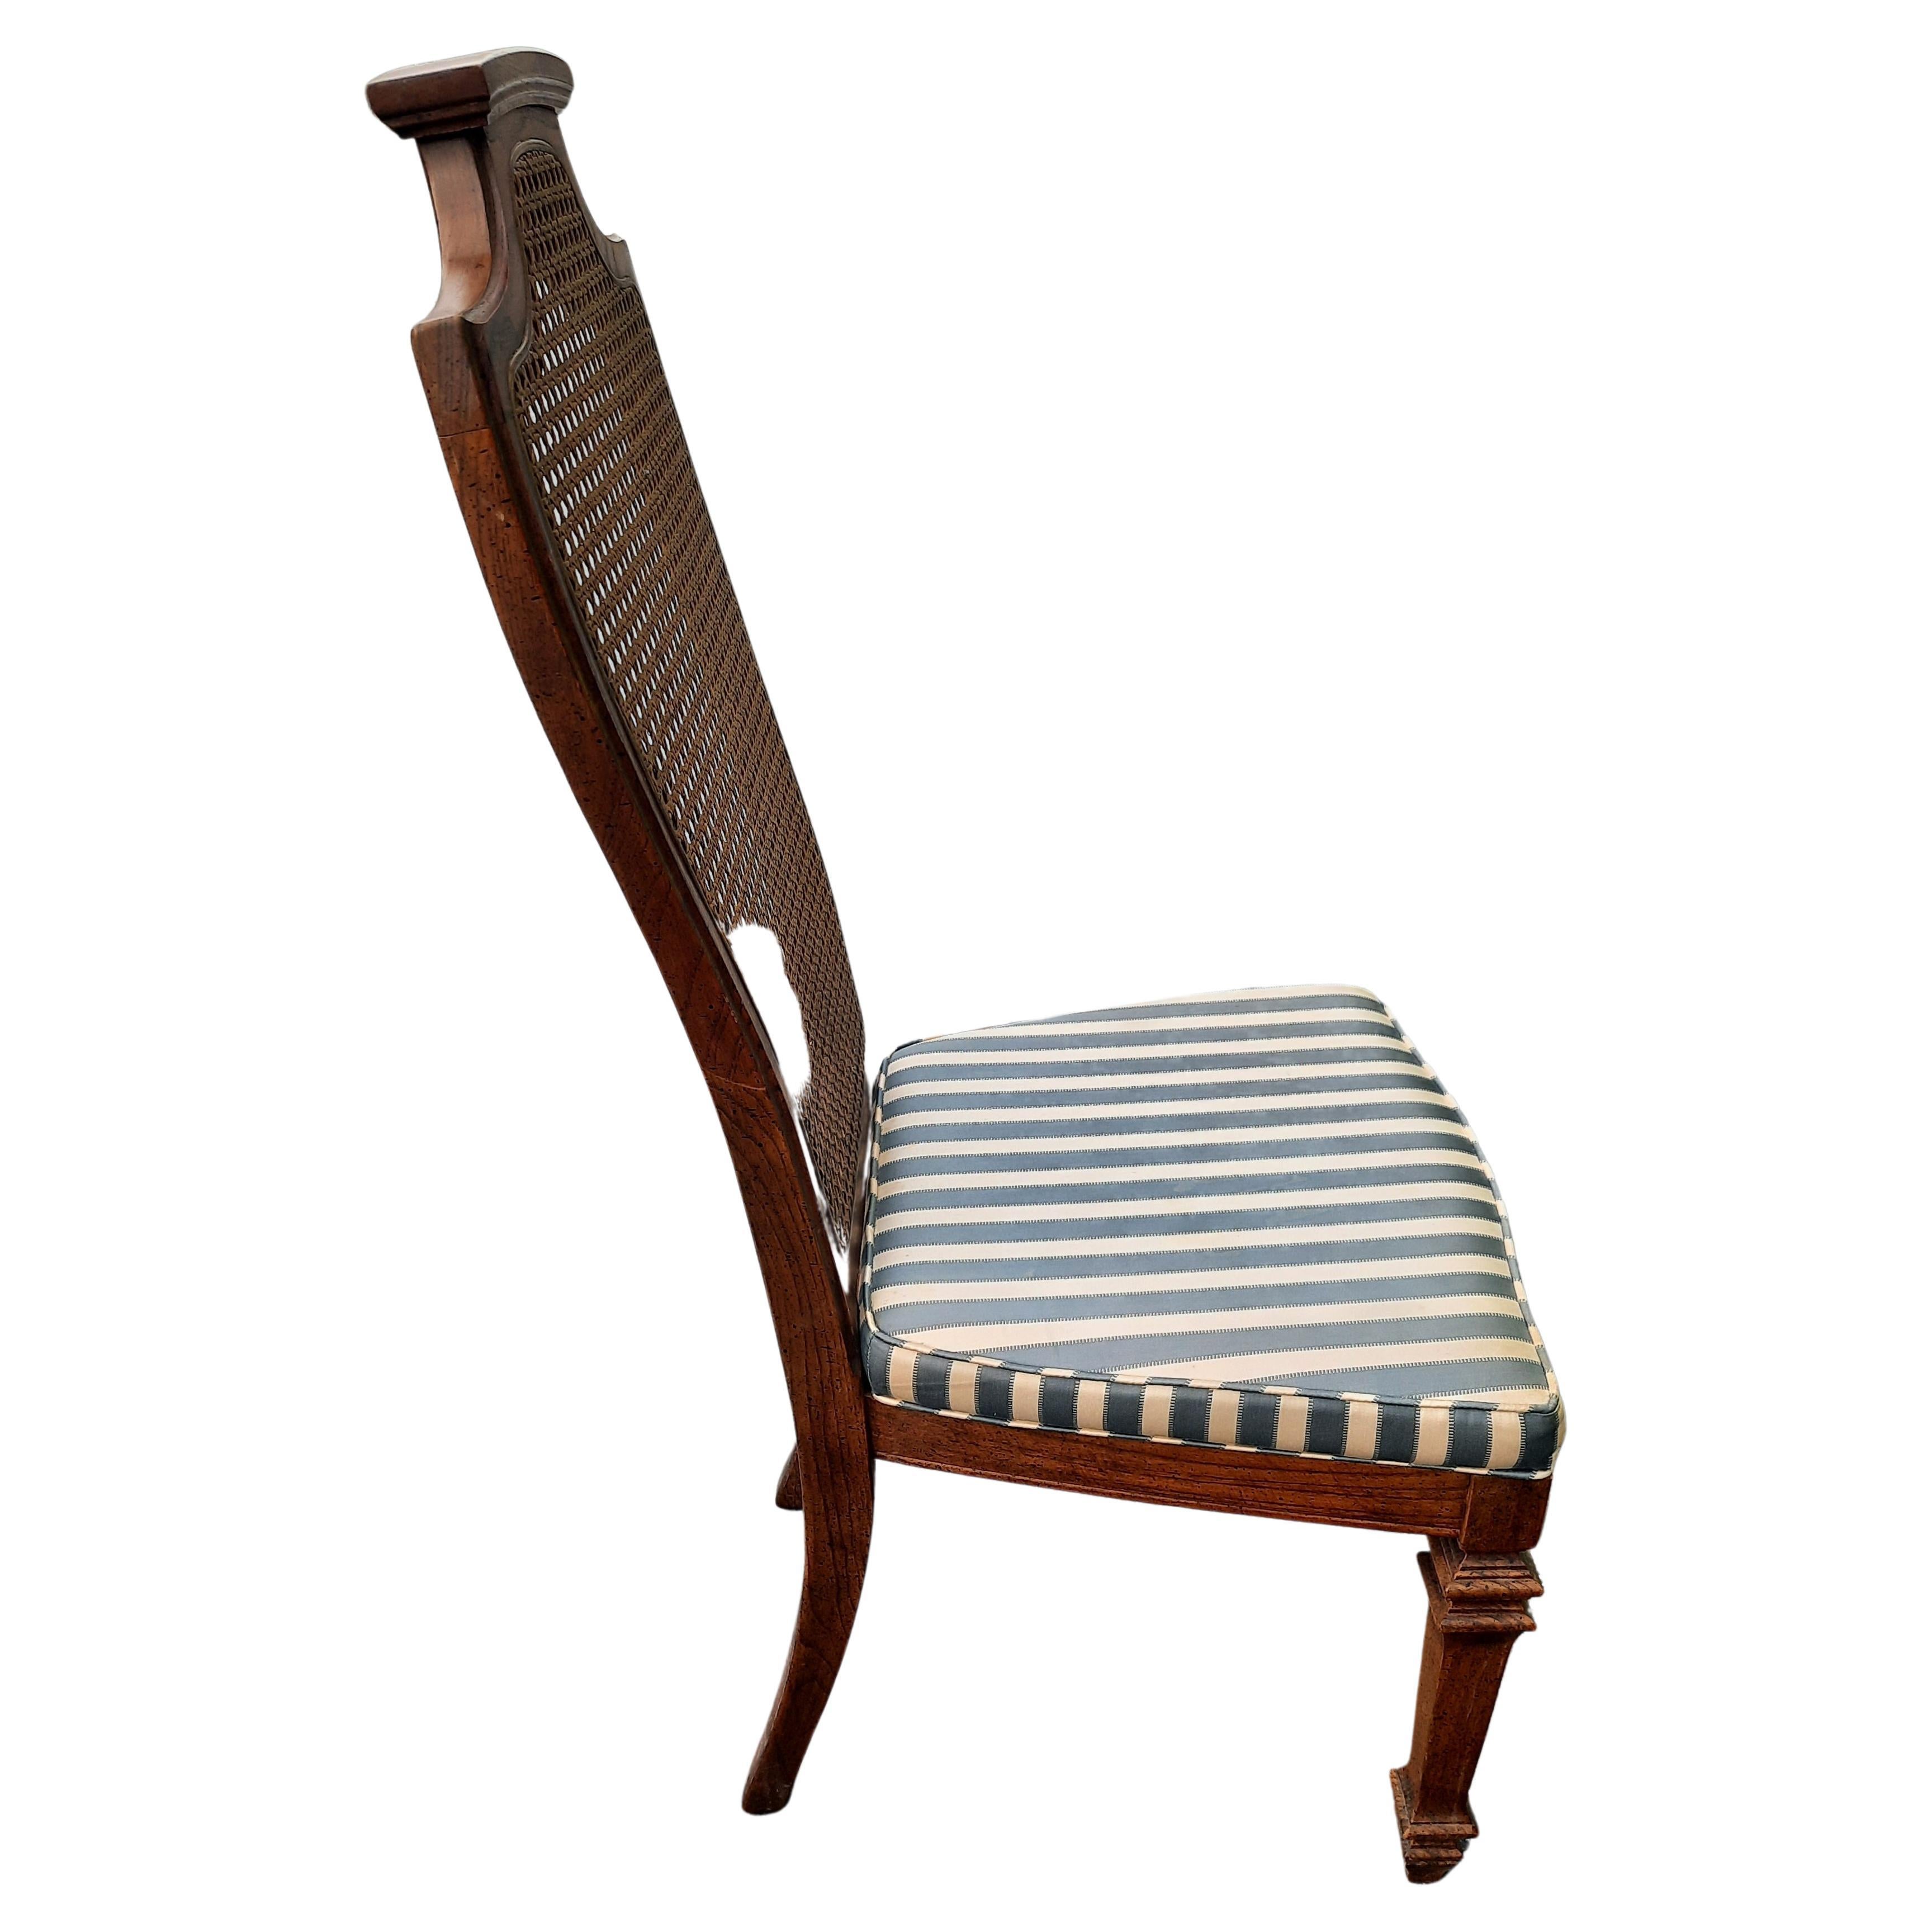 20th Century French Country Walnut Cane Back Upholstered Seats